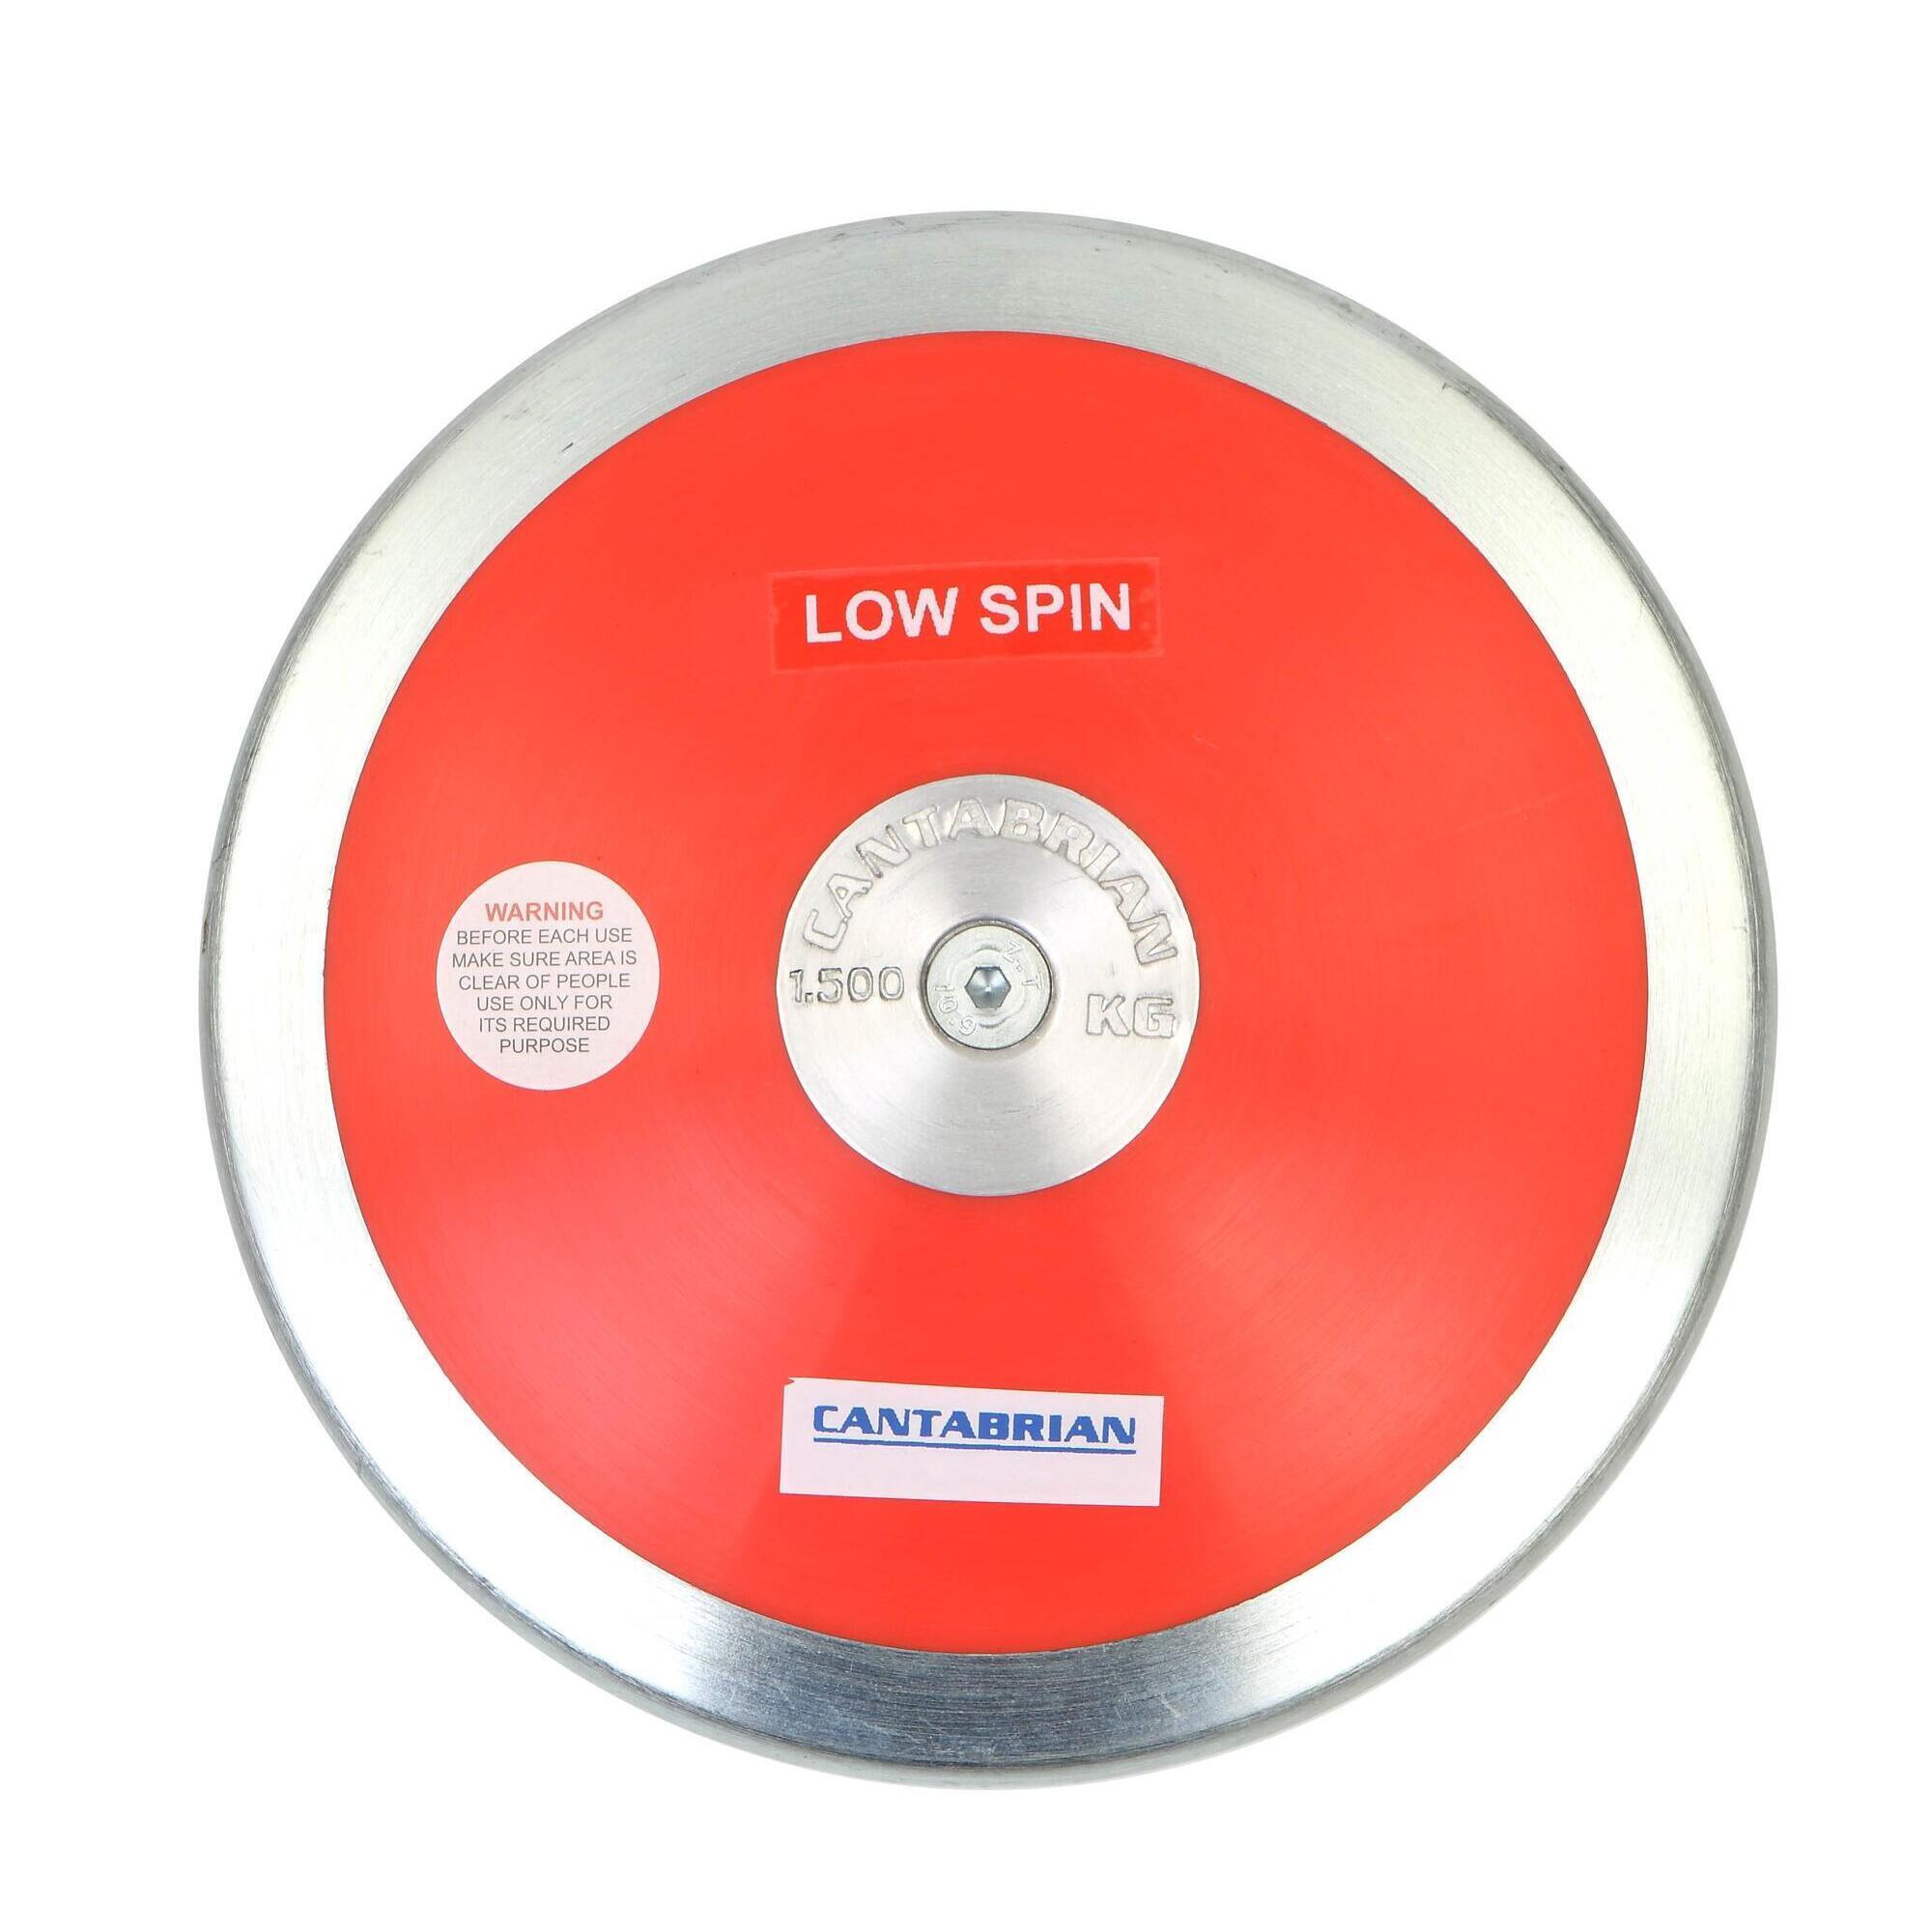 CANTABRIAN Cantabrian Low Spin Discus